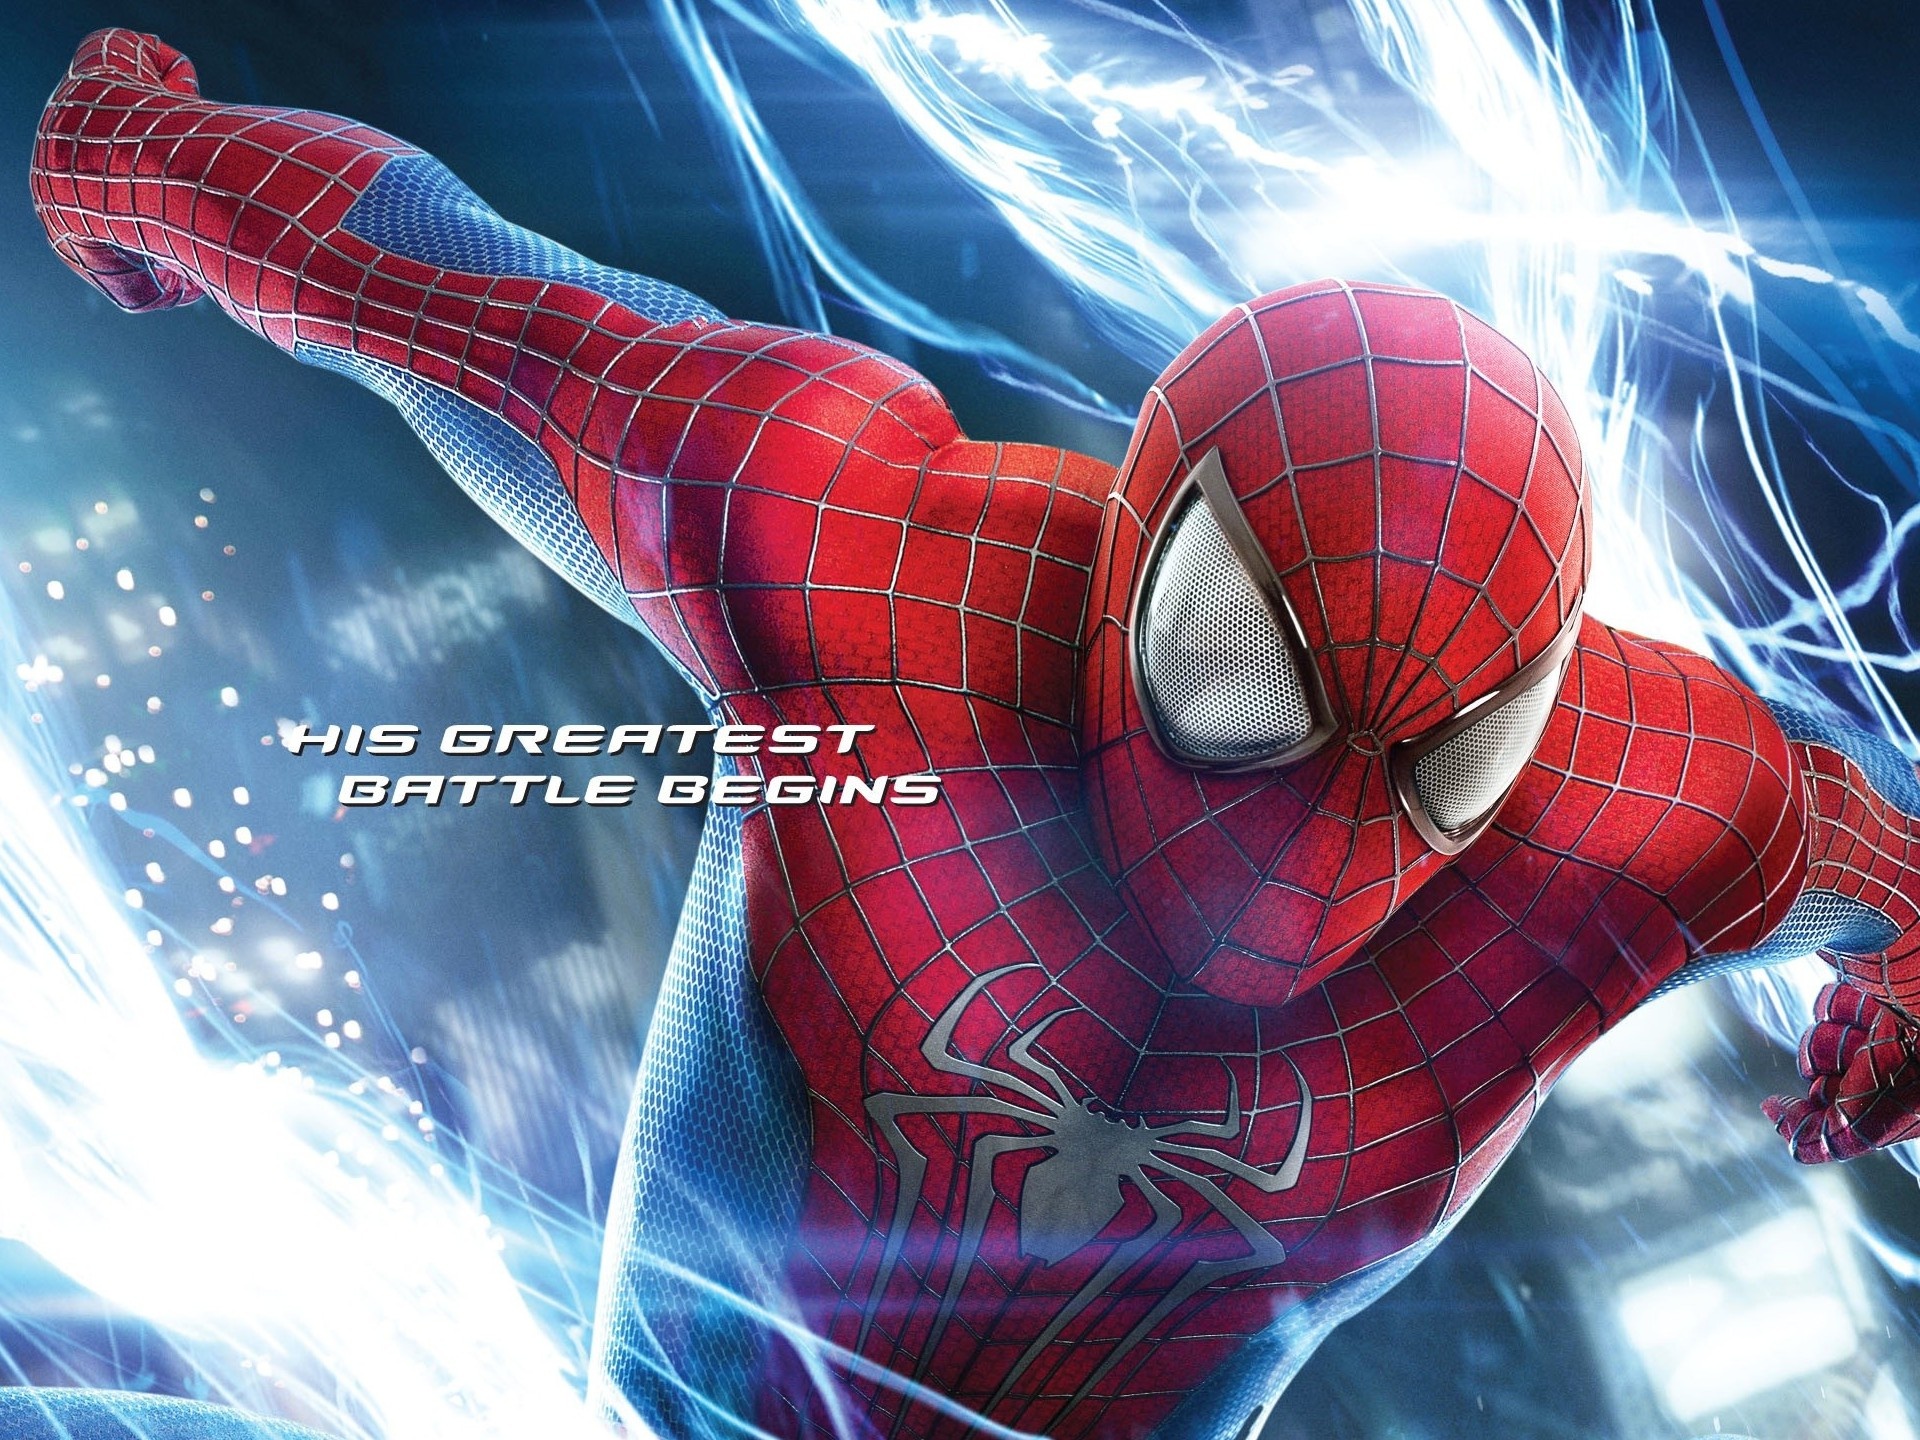 Spidey The Amazing Spider-Man 2 Wallpapers - 1920x1440 - 1077177